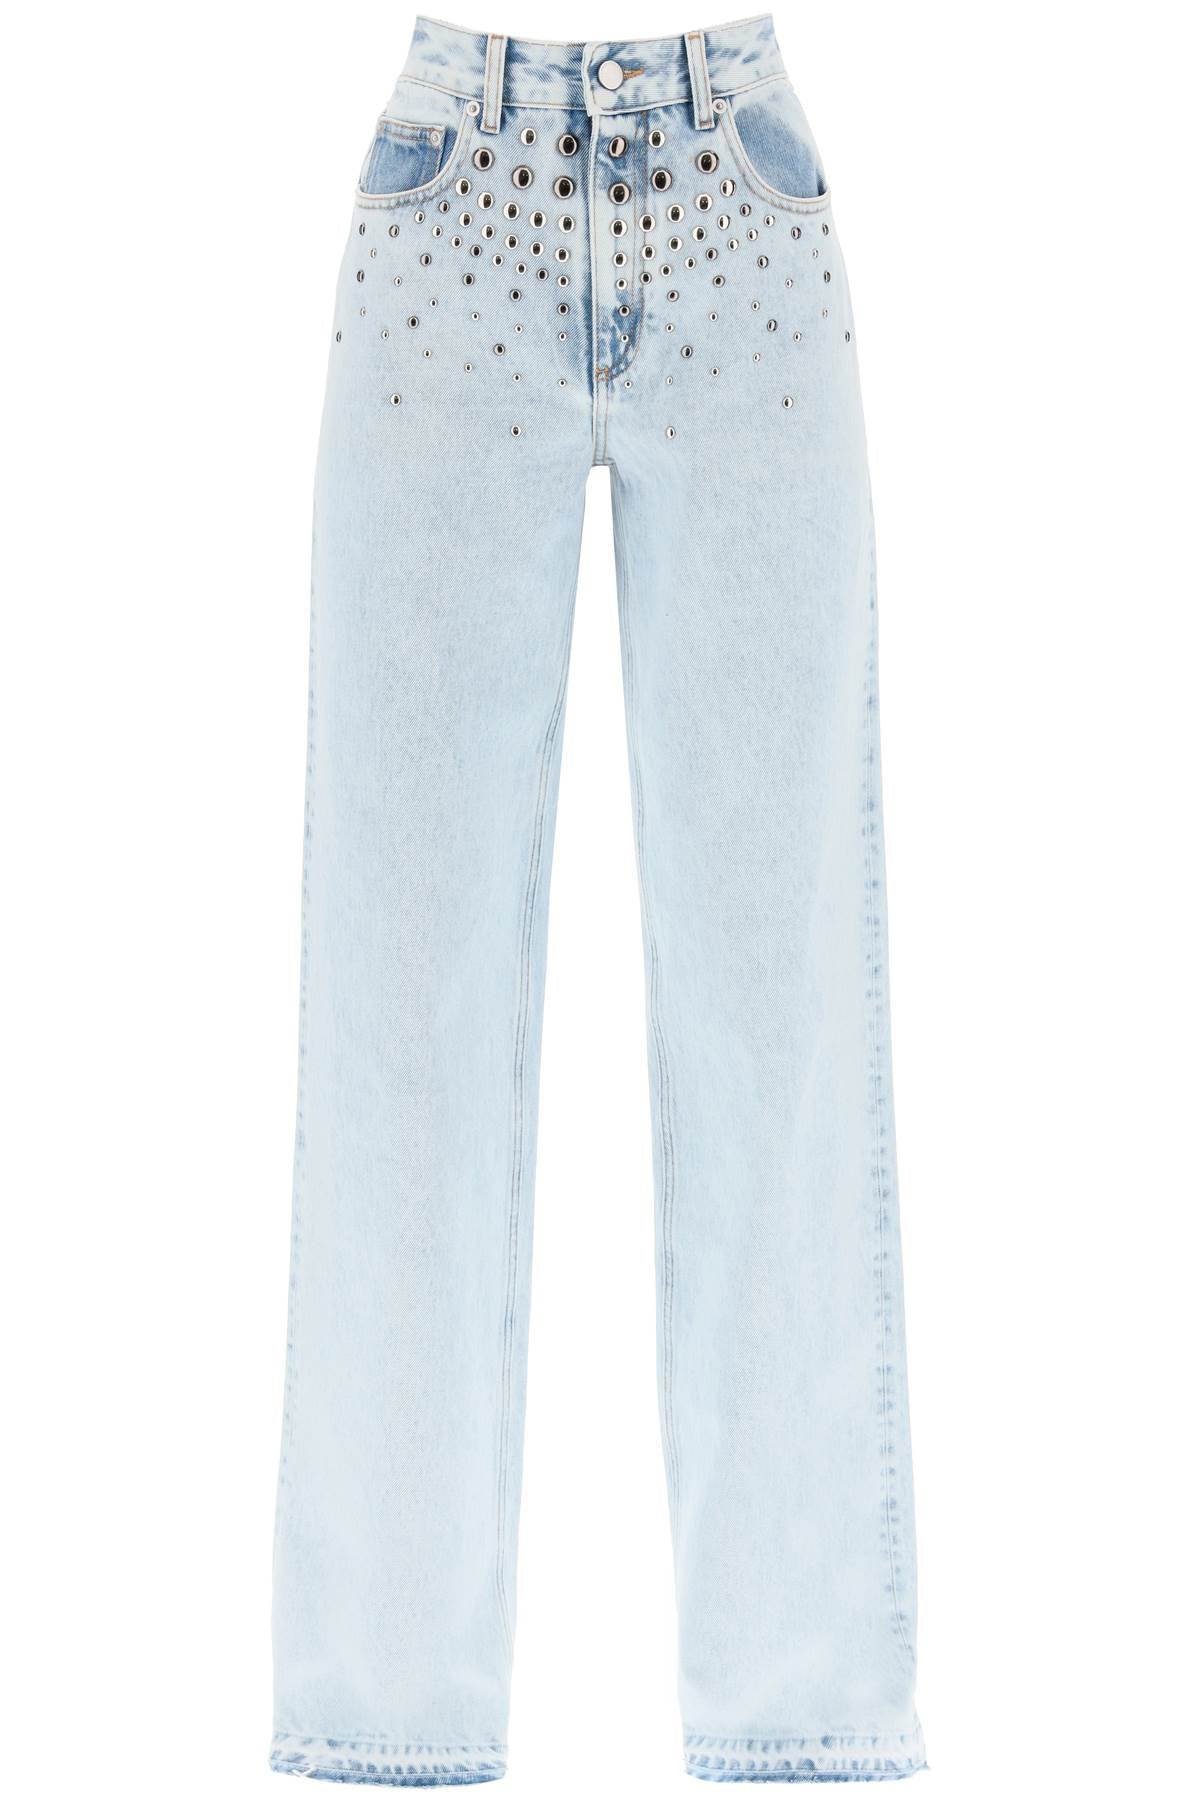 Alessandra rich jeans with studs-0